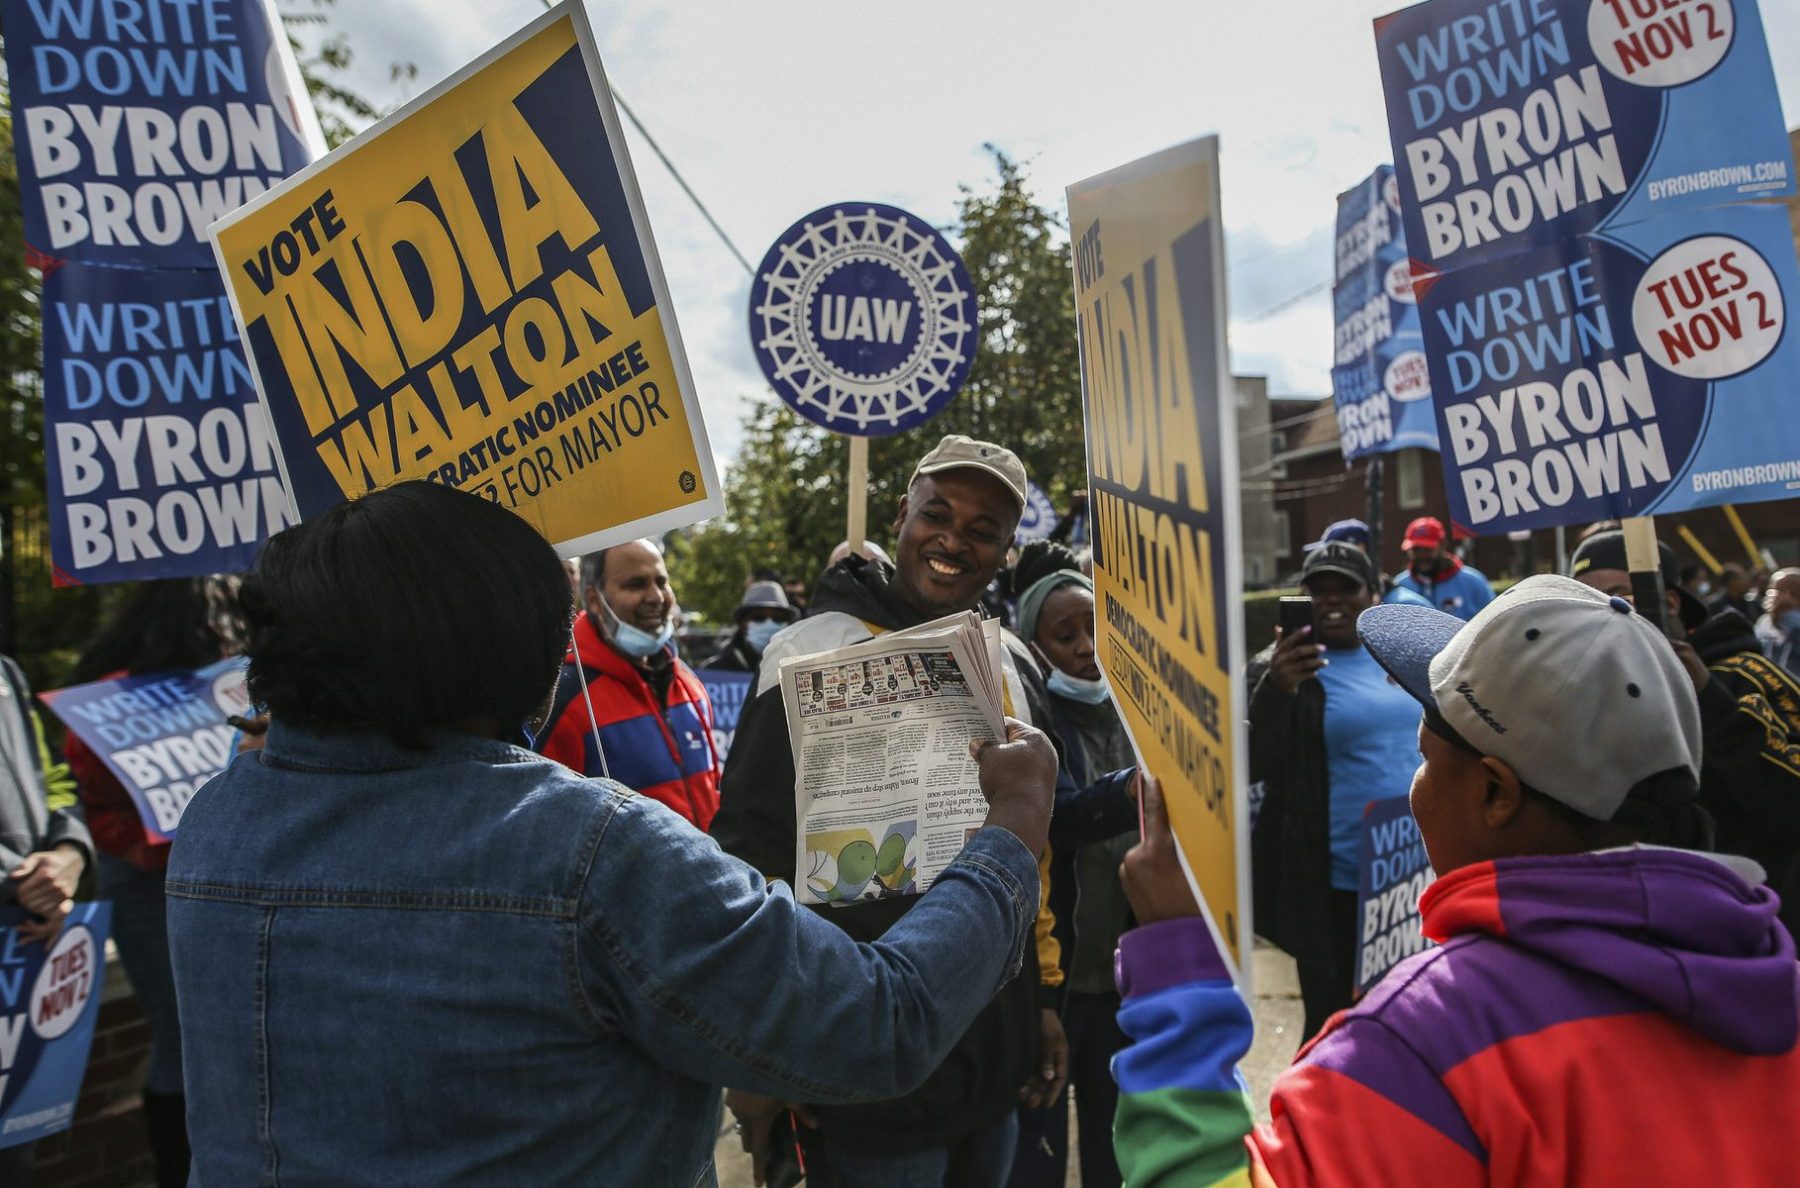 People hold signs for India Walton and Byron Brown in Buffalo